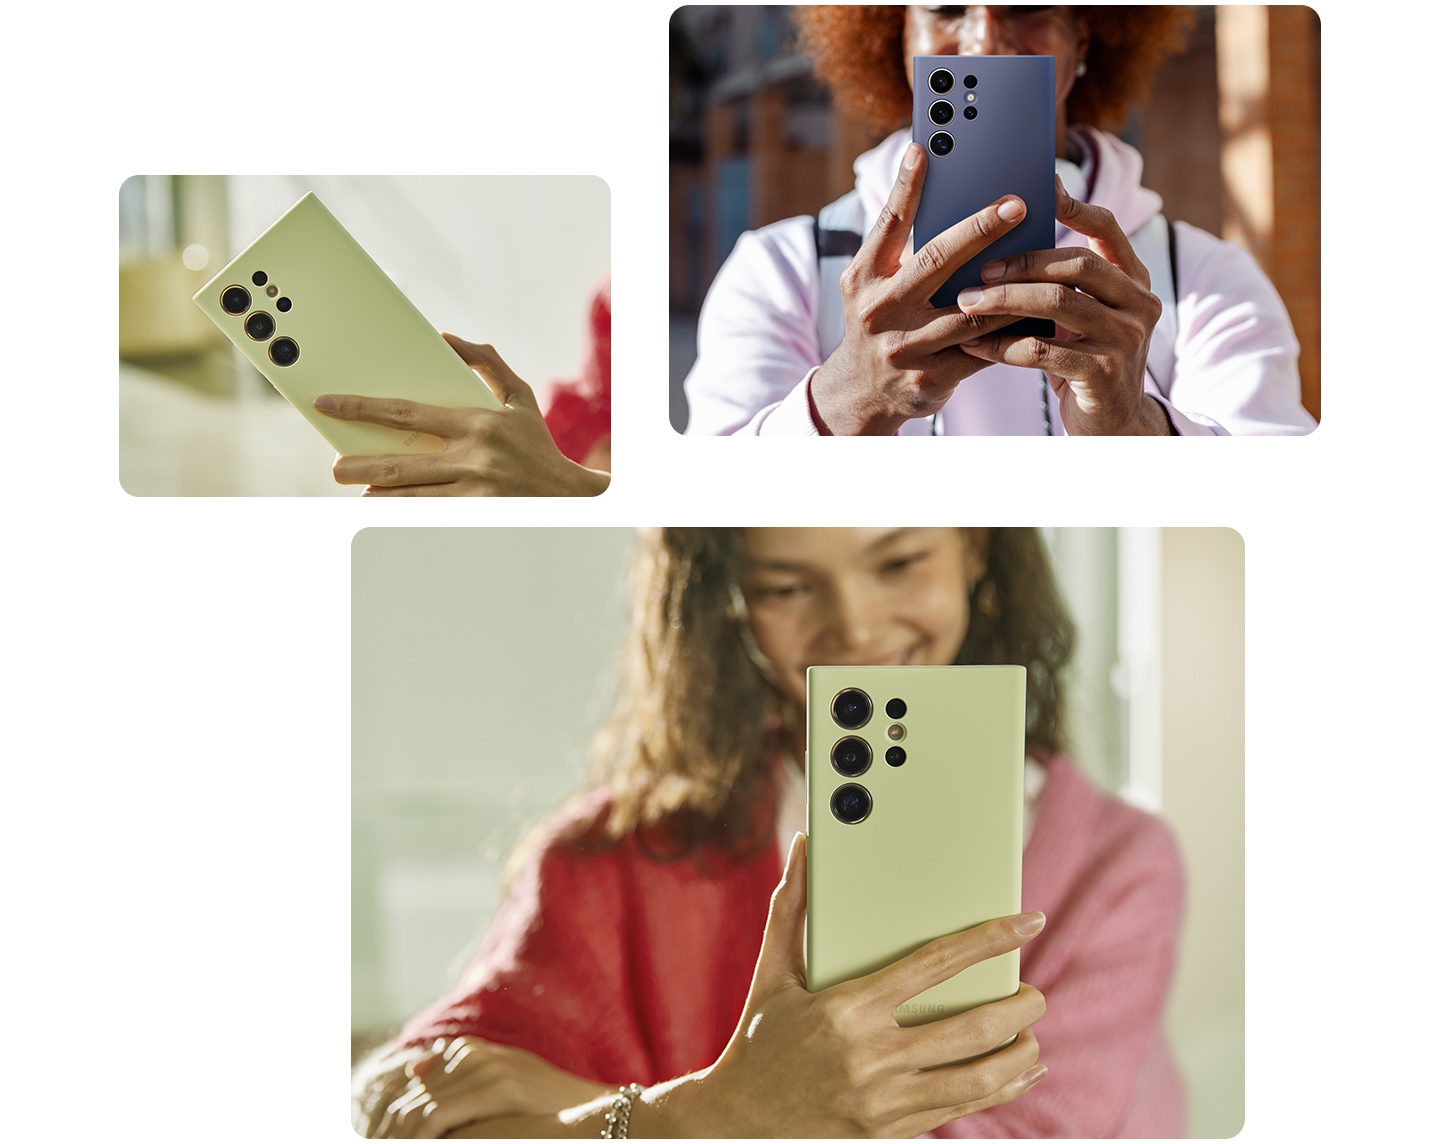 On the top left, a man is comfortably holding the Galaxy S24 Ultra in a violet Silicone case. Below, two different shots show a person holding a Galaxy S24 Ultra in a lime Silicone case with one hand, showing the ease of its grip.